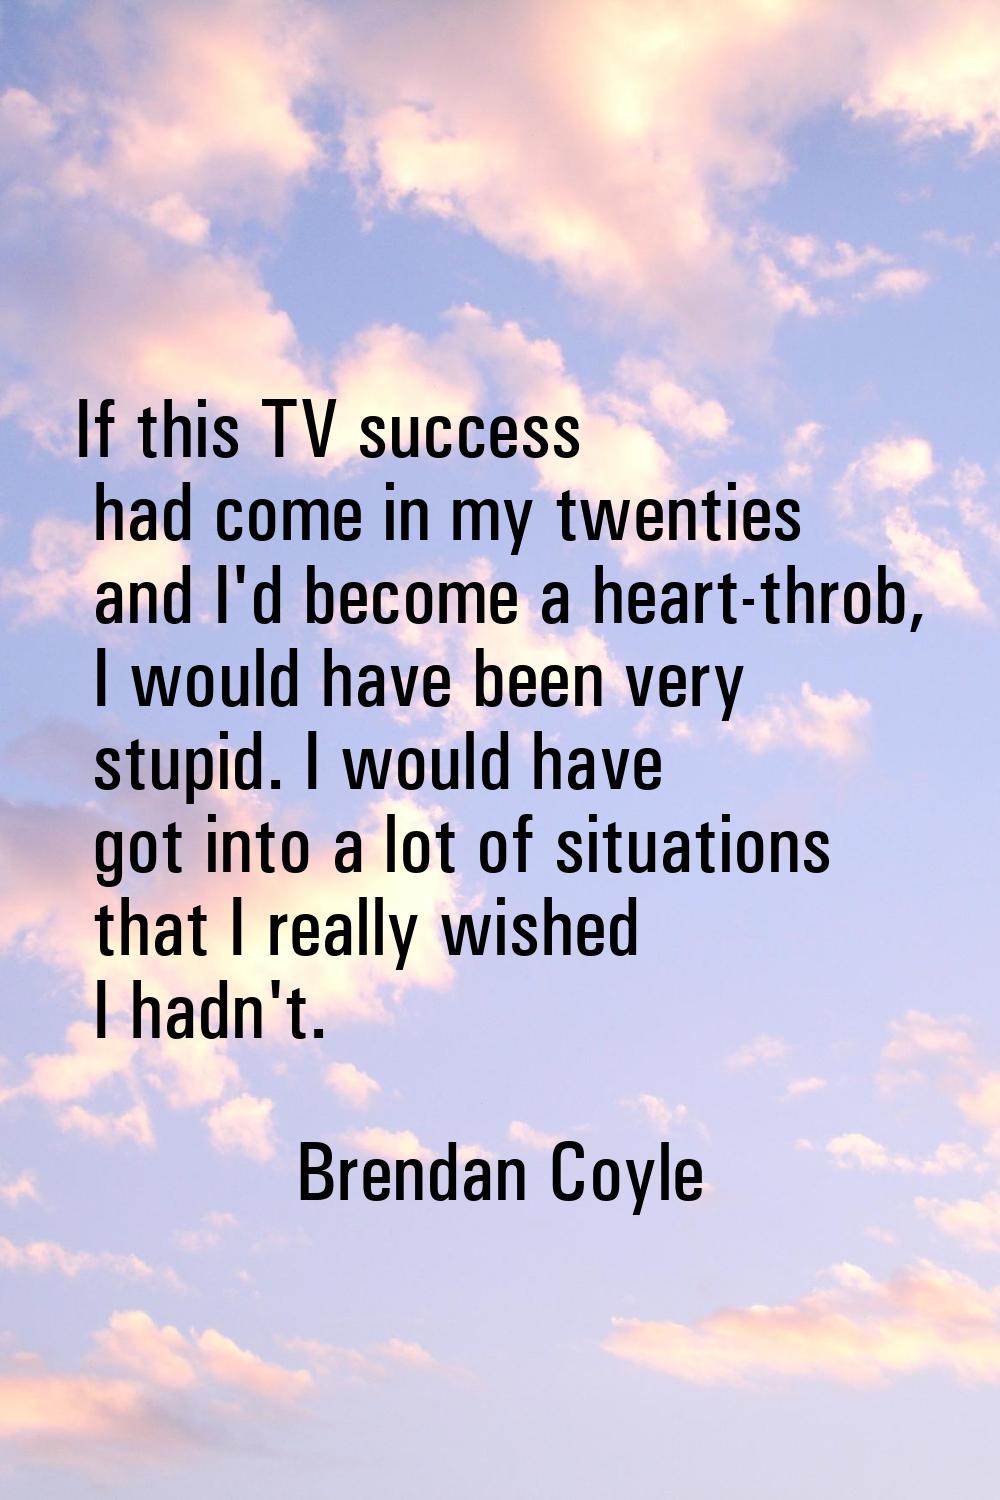 If this TV success had come in my twenties and I'd become a heart-throb, I would have been very stu